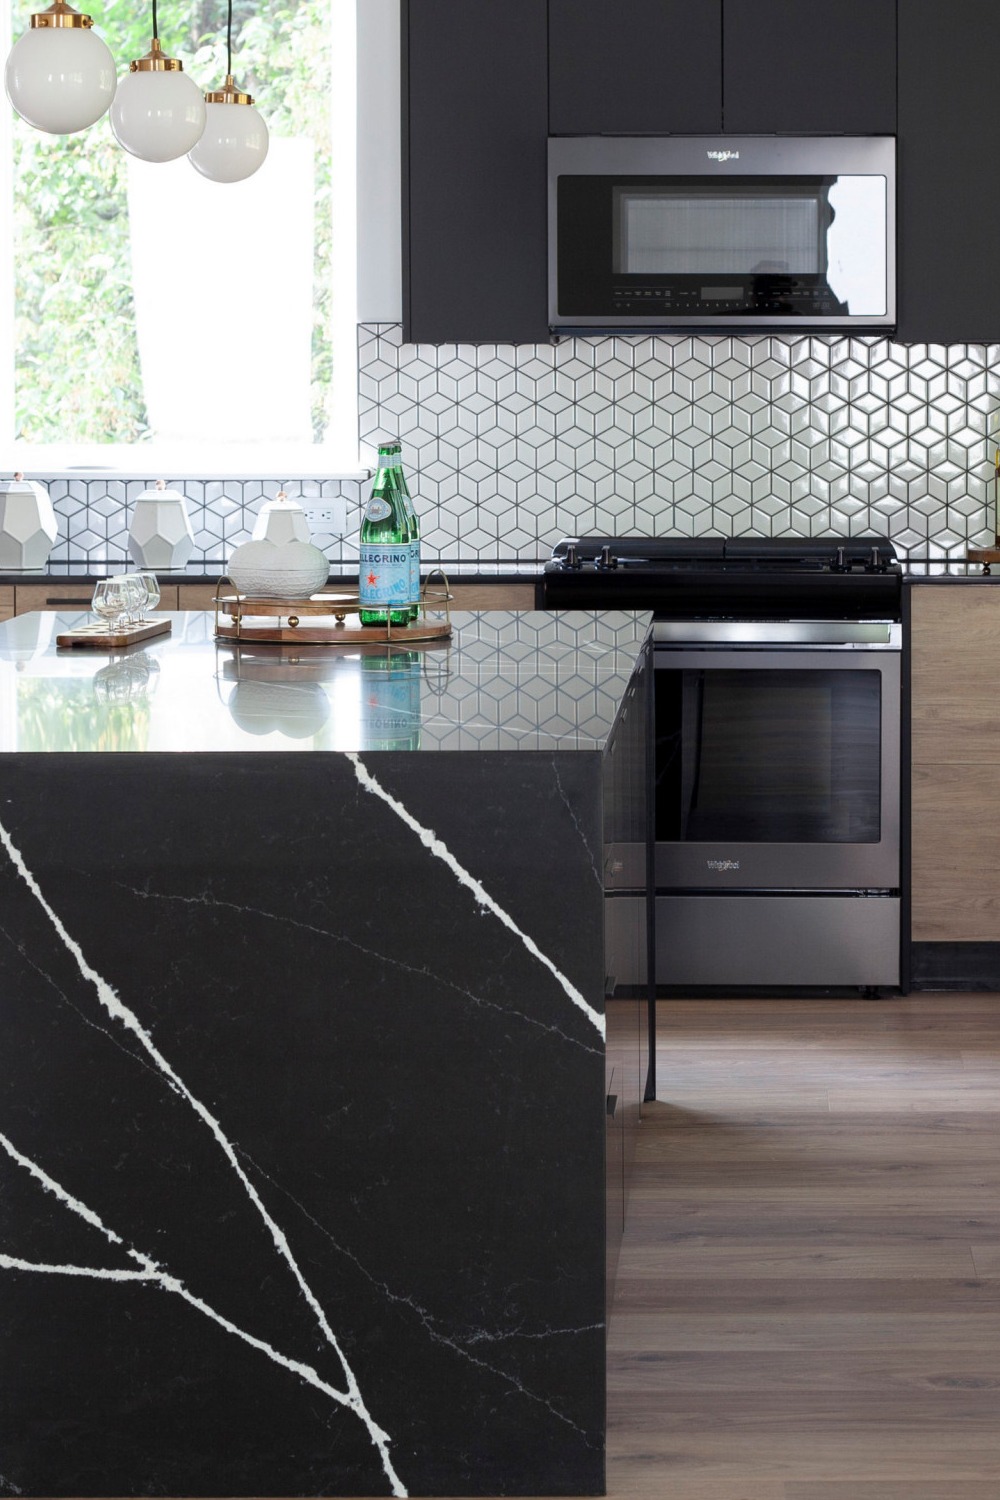 Traditional Backsplash Materials Black And White Theme Kitchen Island Cabinet Color Endlessly Chic